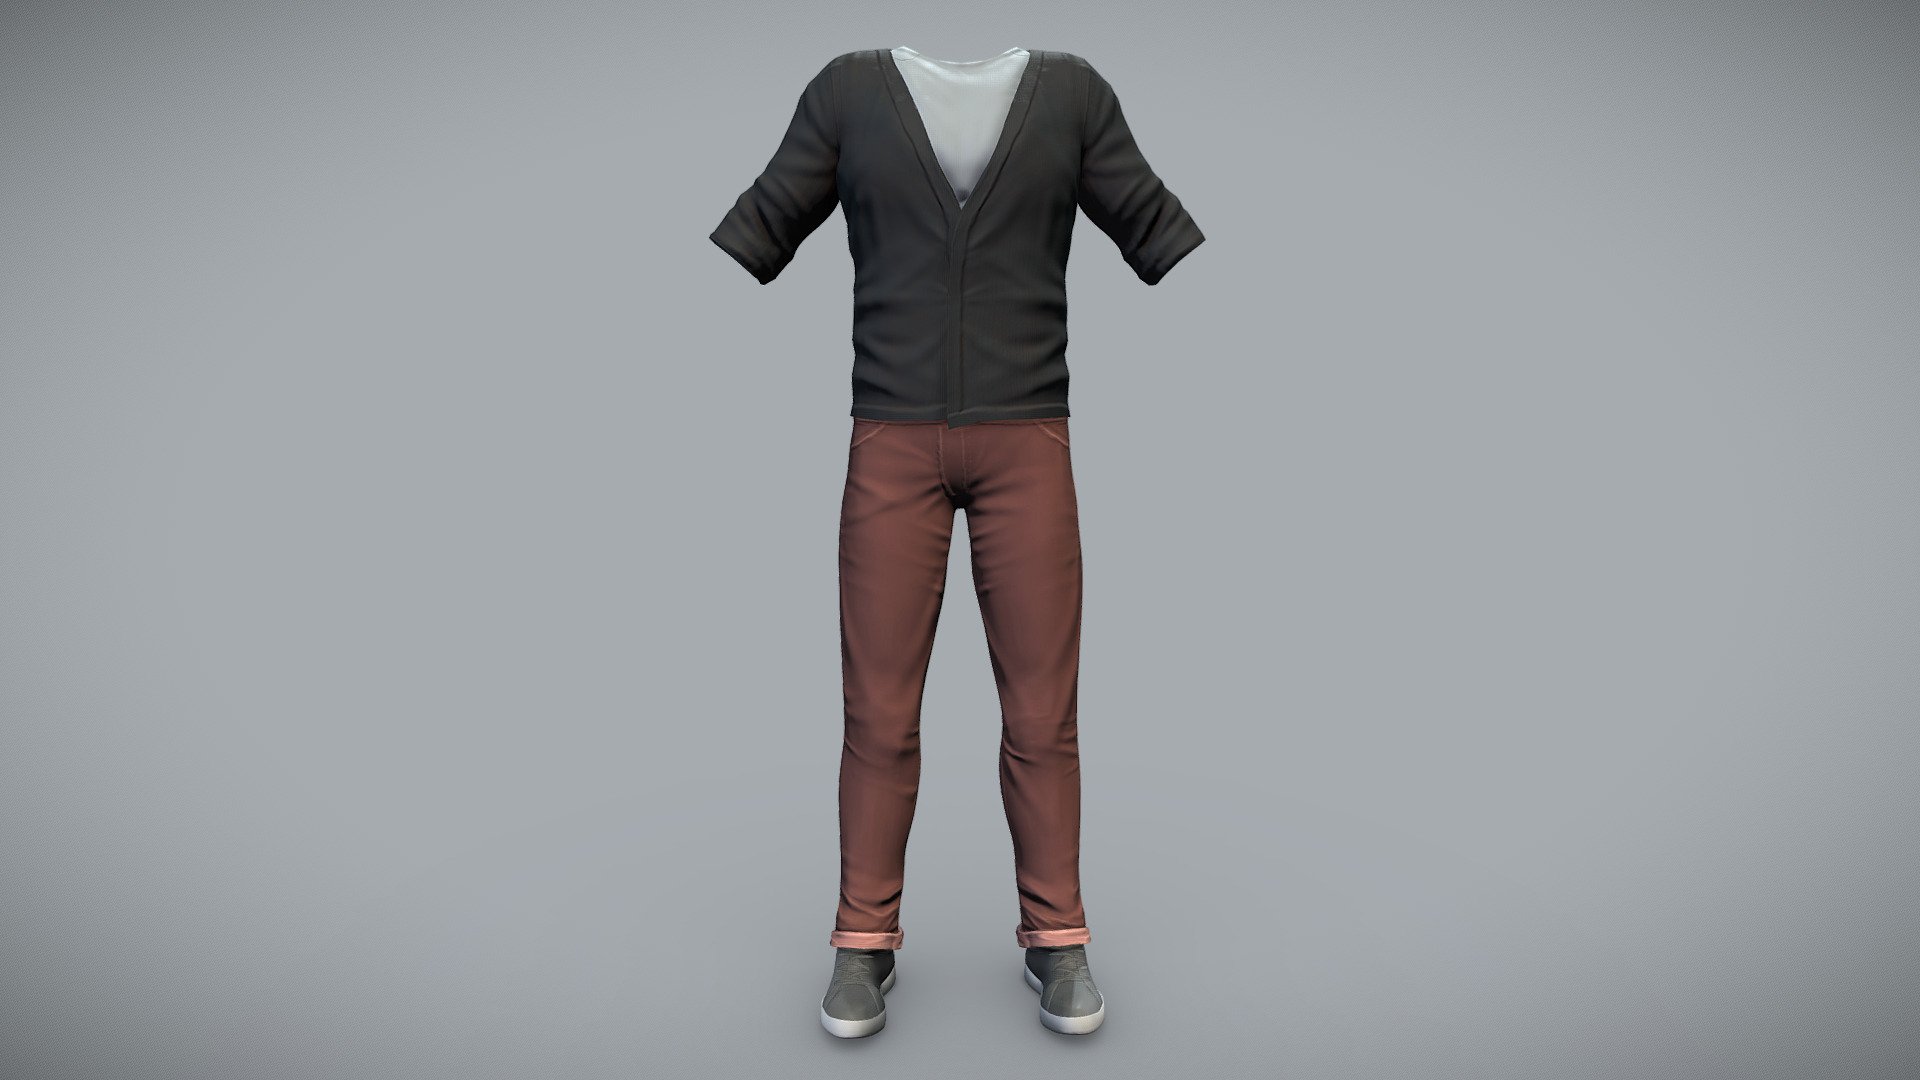 Cardigan + Pants + Shoes (Separate models)

Can be fitted to any character

Ready for games

Clean topology

Unwrapped UVs

High quality realistic textues

FBX, OBJ, gITF, USDZ (request other formats)

PBR or Classic

Please ask for any other questions

Type     user:3dia &ldquo;search term